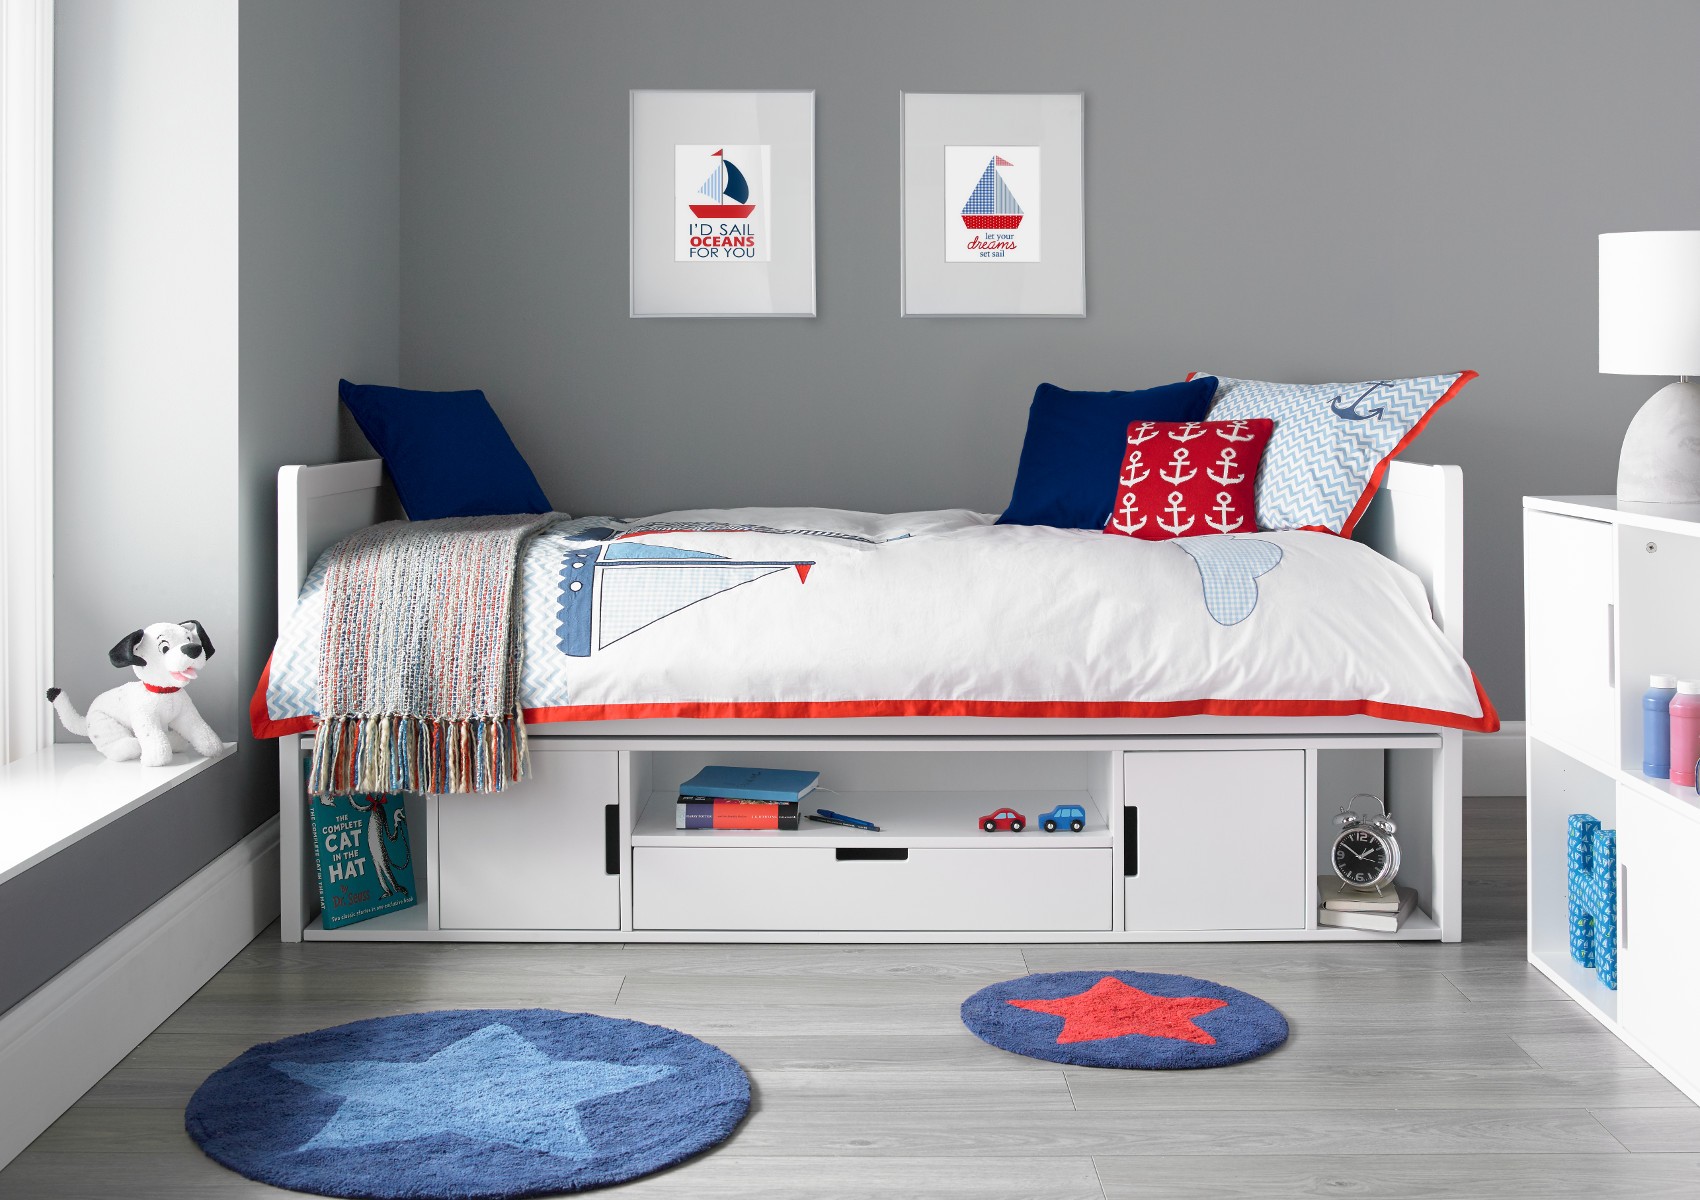 Vancouver Cabin Bed - Cabin Beds - Childrens Beds - Beds